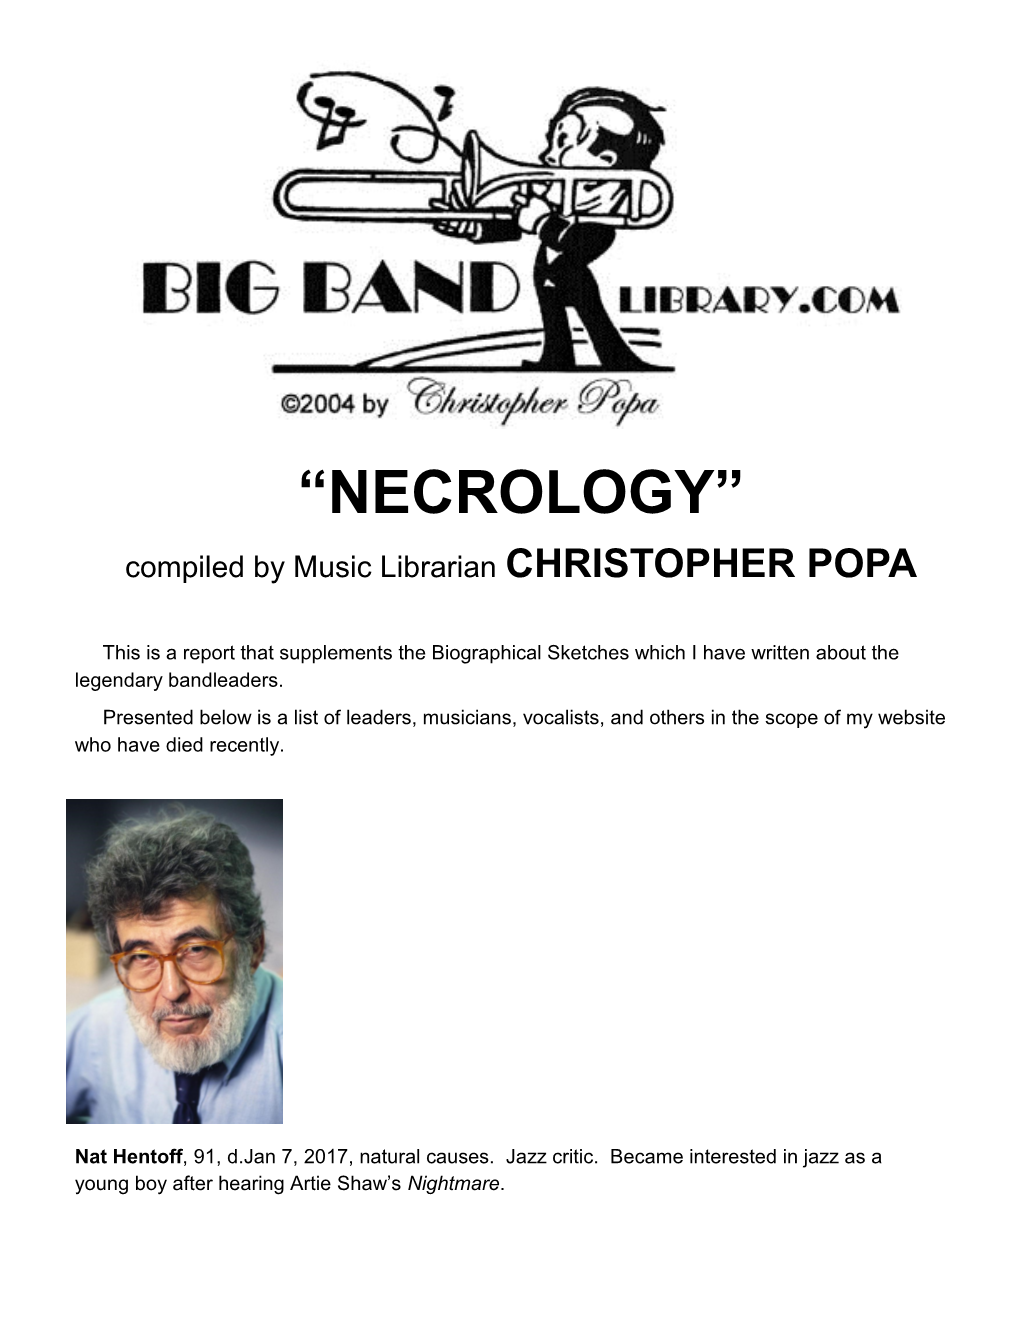 “NECROLOGY” Compiled by Music Librarian CHRISTOPHER POPA